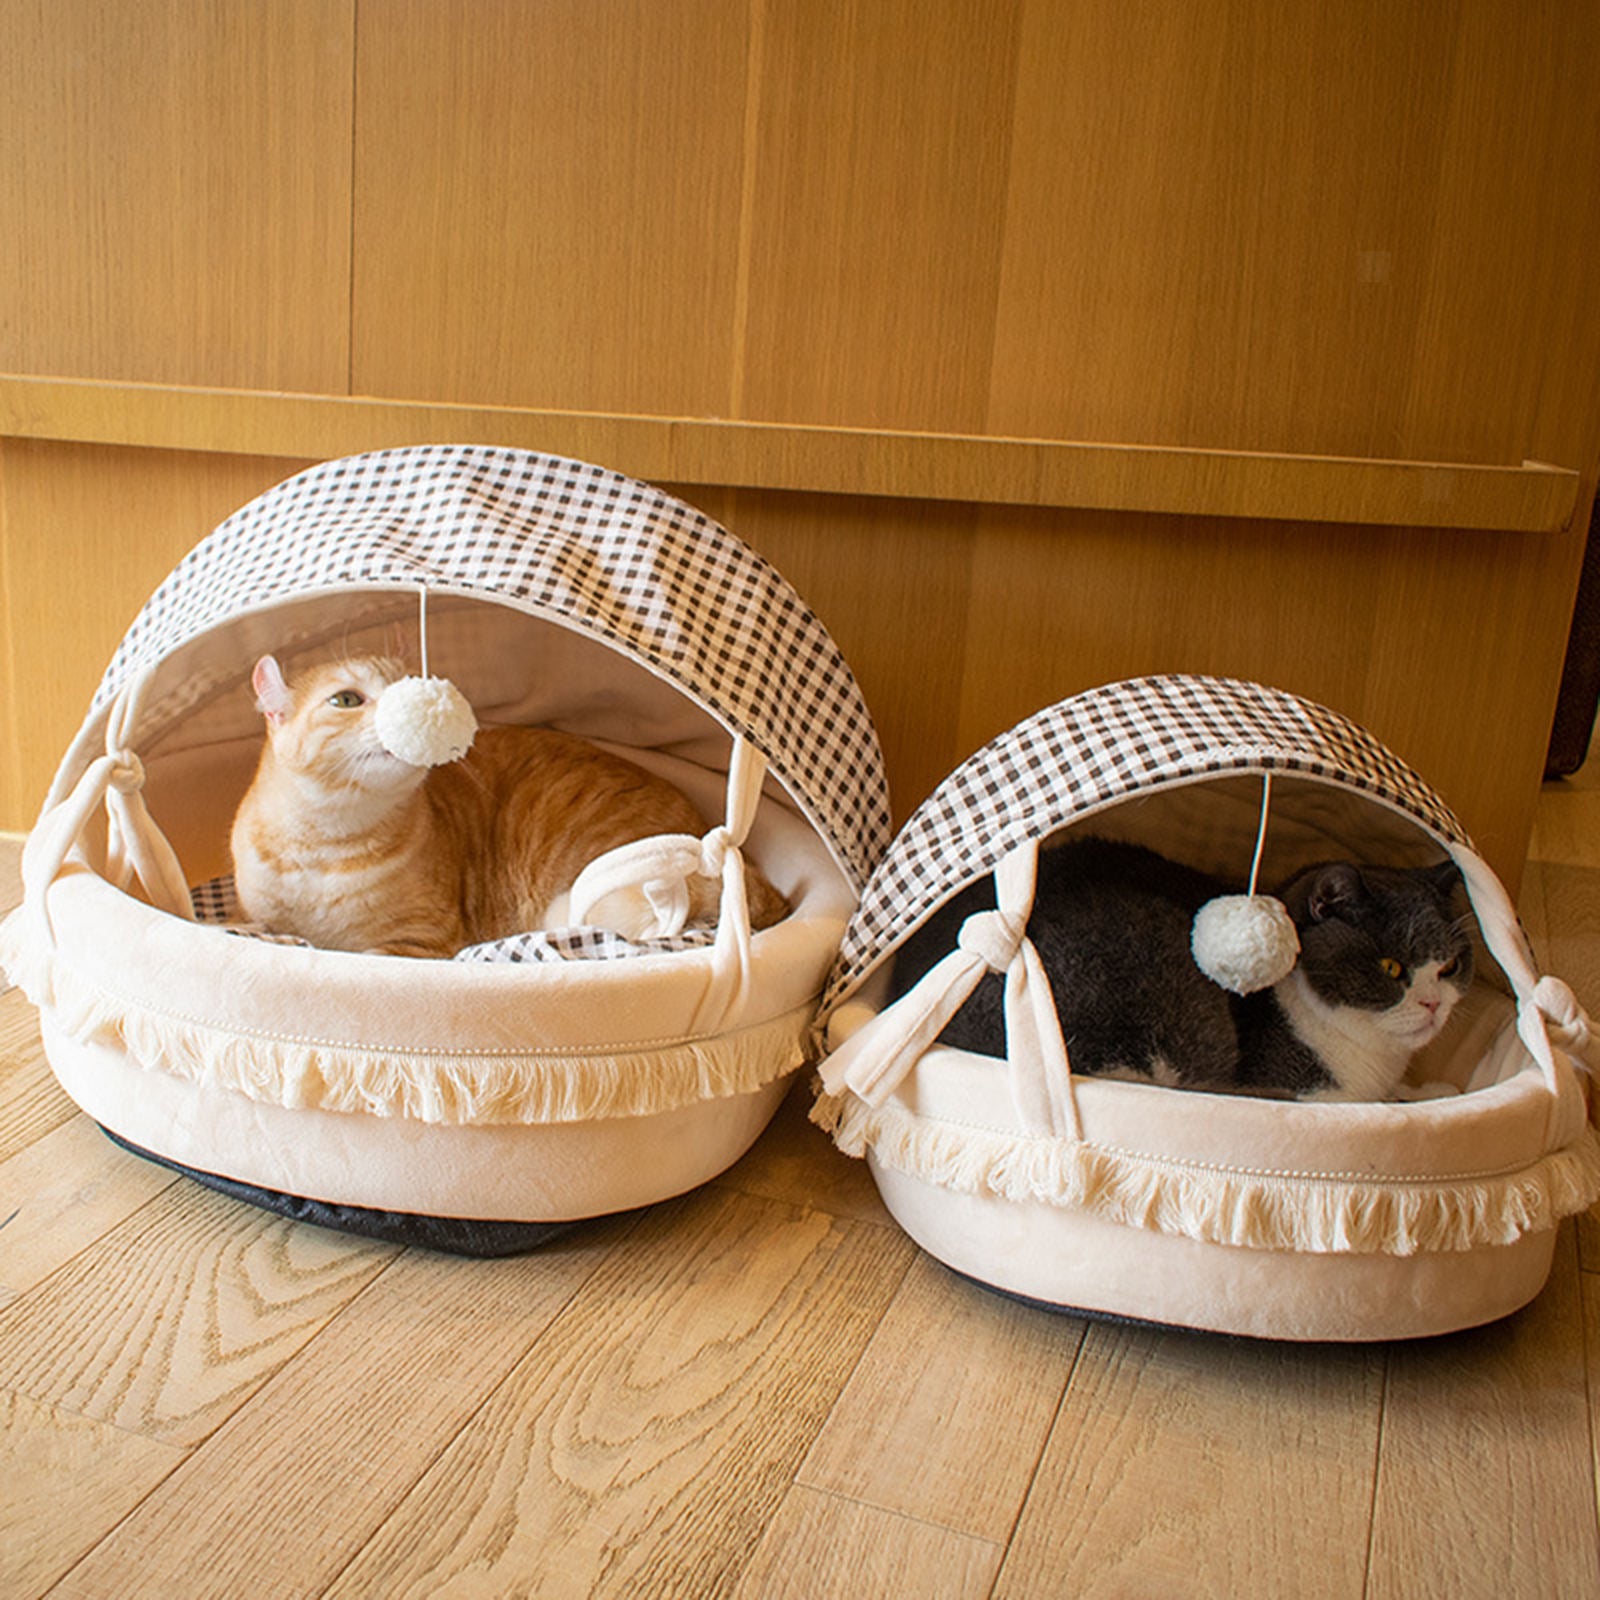 Pet Bed Sleeping Bed with Foldable Cover Soft Plush Pet Nest Bed for Rabbits